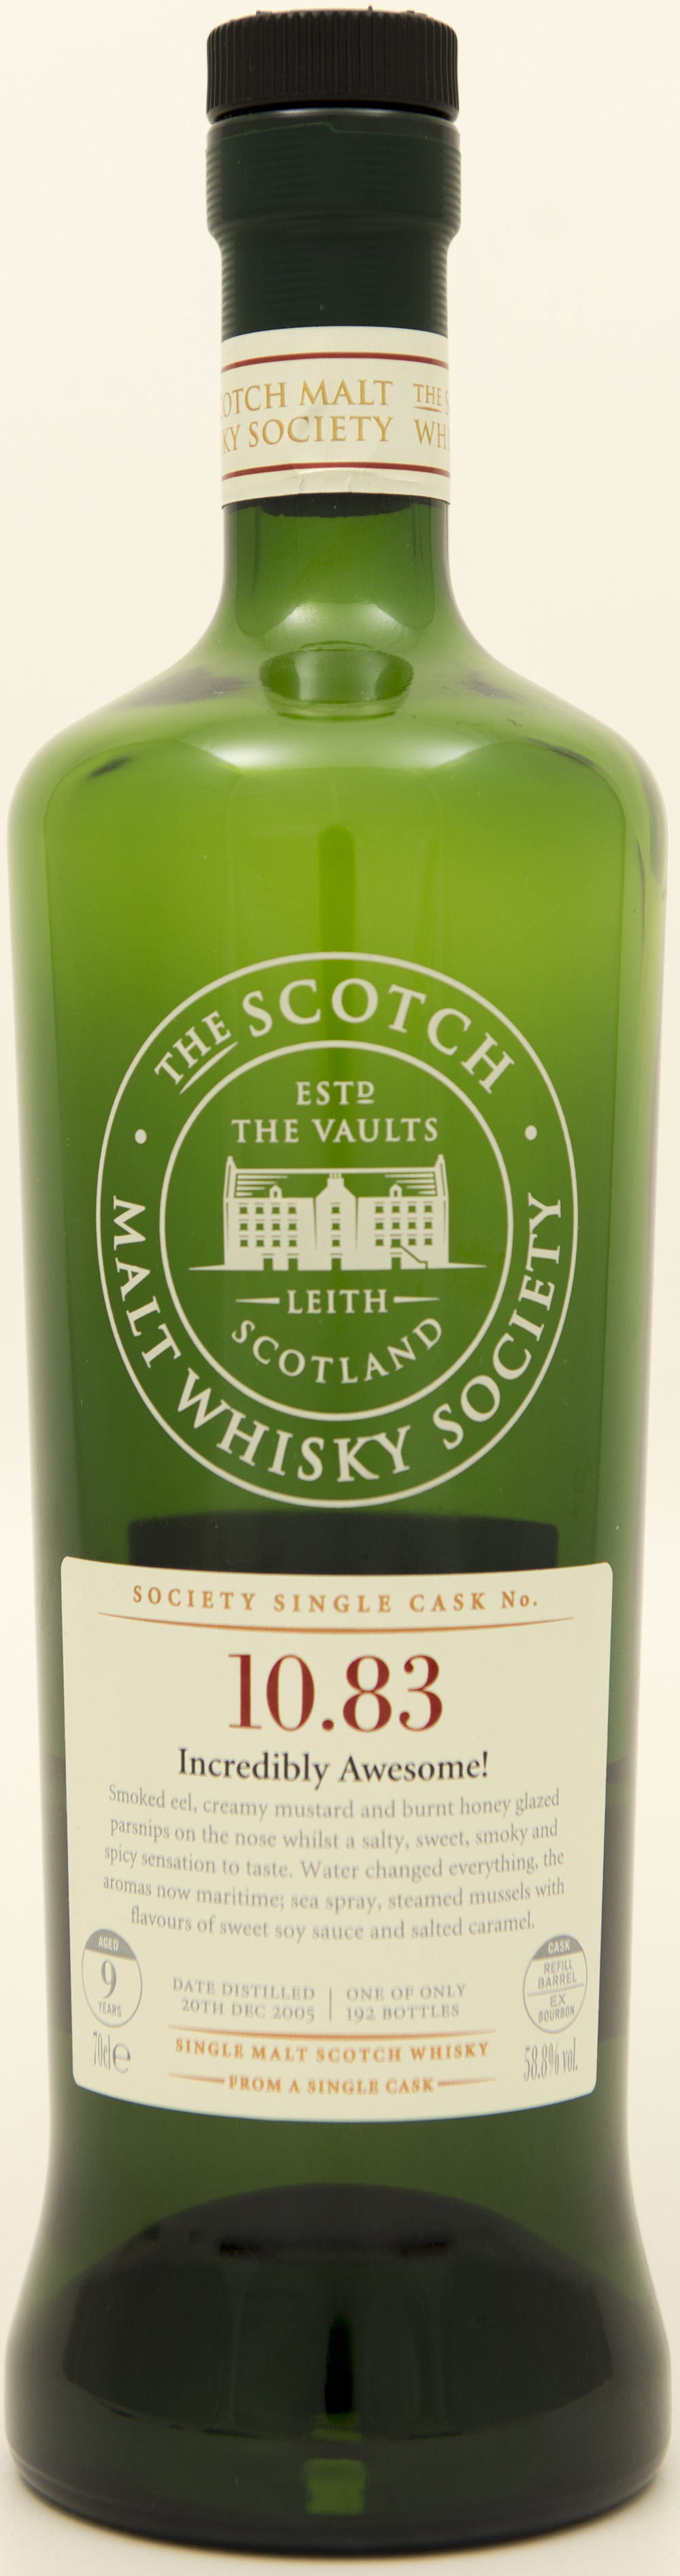 Billede: DSC_3661 - SMWS 10.83 - Incredibly Awesome.jpg